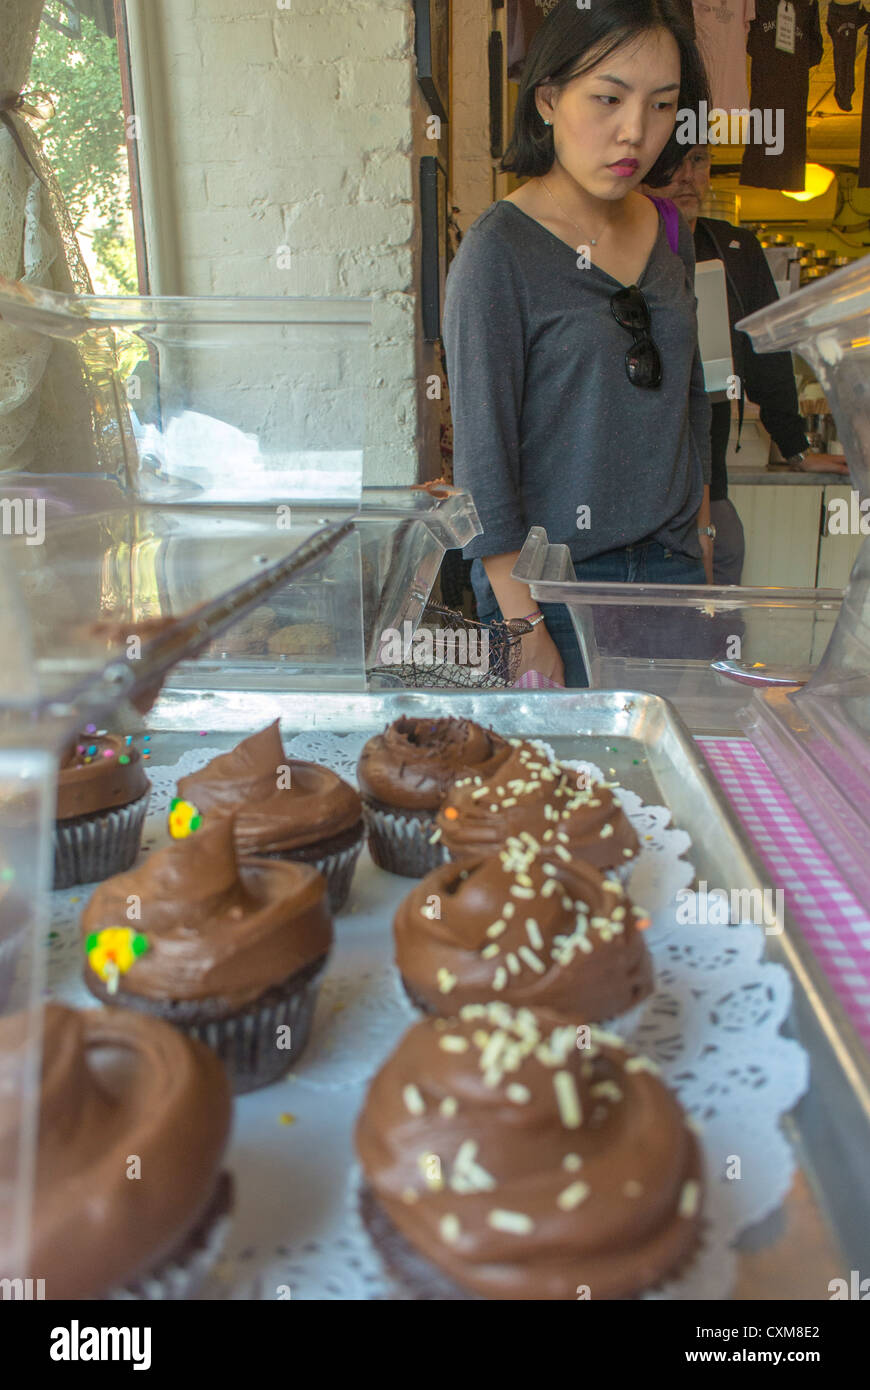 New York City, NY, USA, Woman Shopping in American Bakery Shop, 'Magnolia'  in Greenwich Village, Window Display Stock Photo